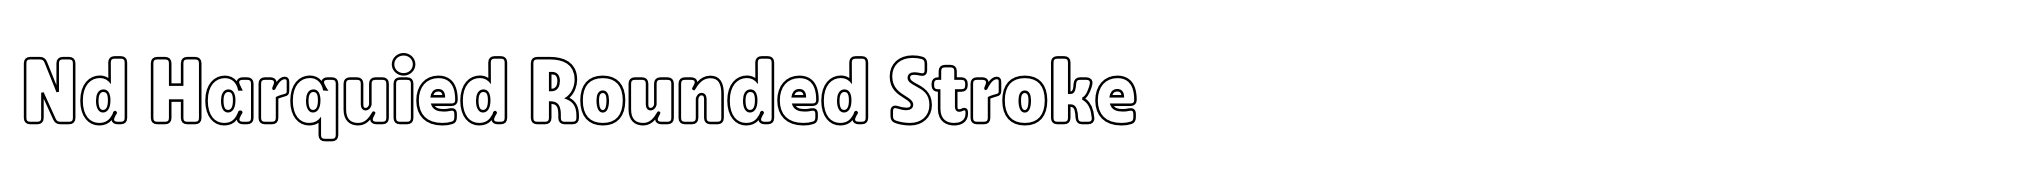 Nd Harquied Rounded Stroke image